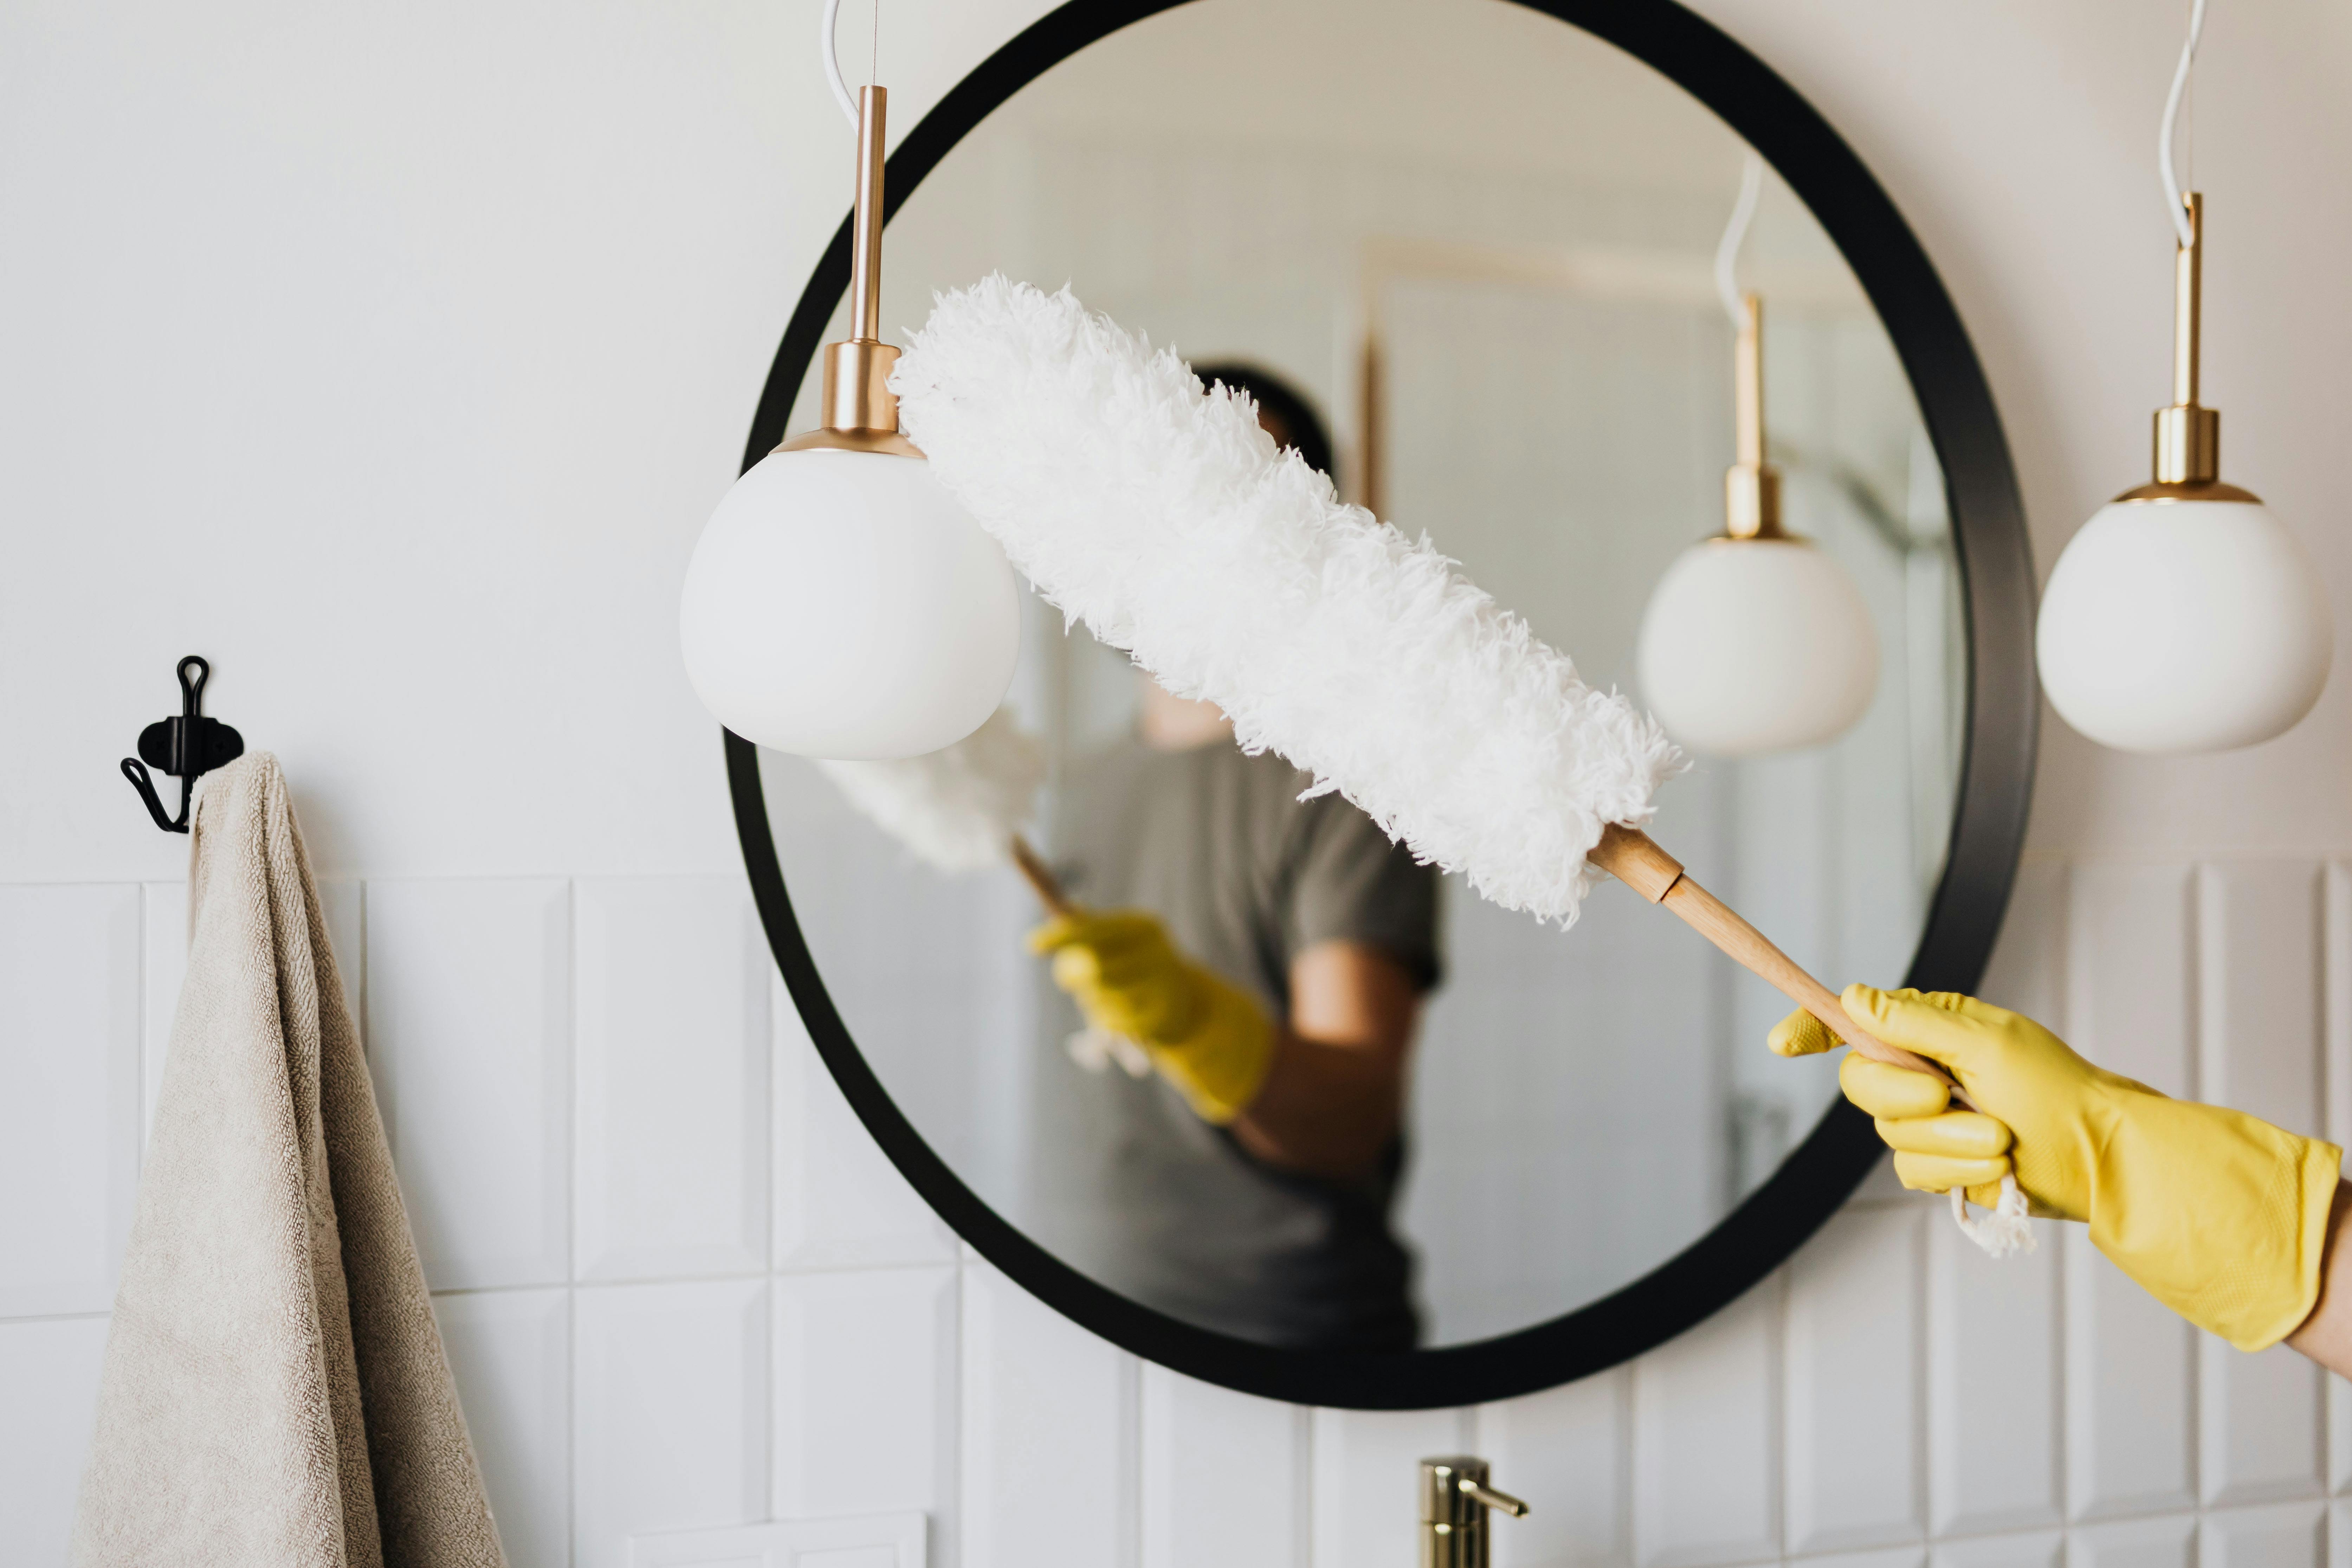 A woman cleaning her house | Source: Pexels